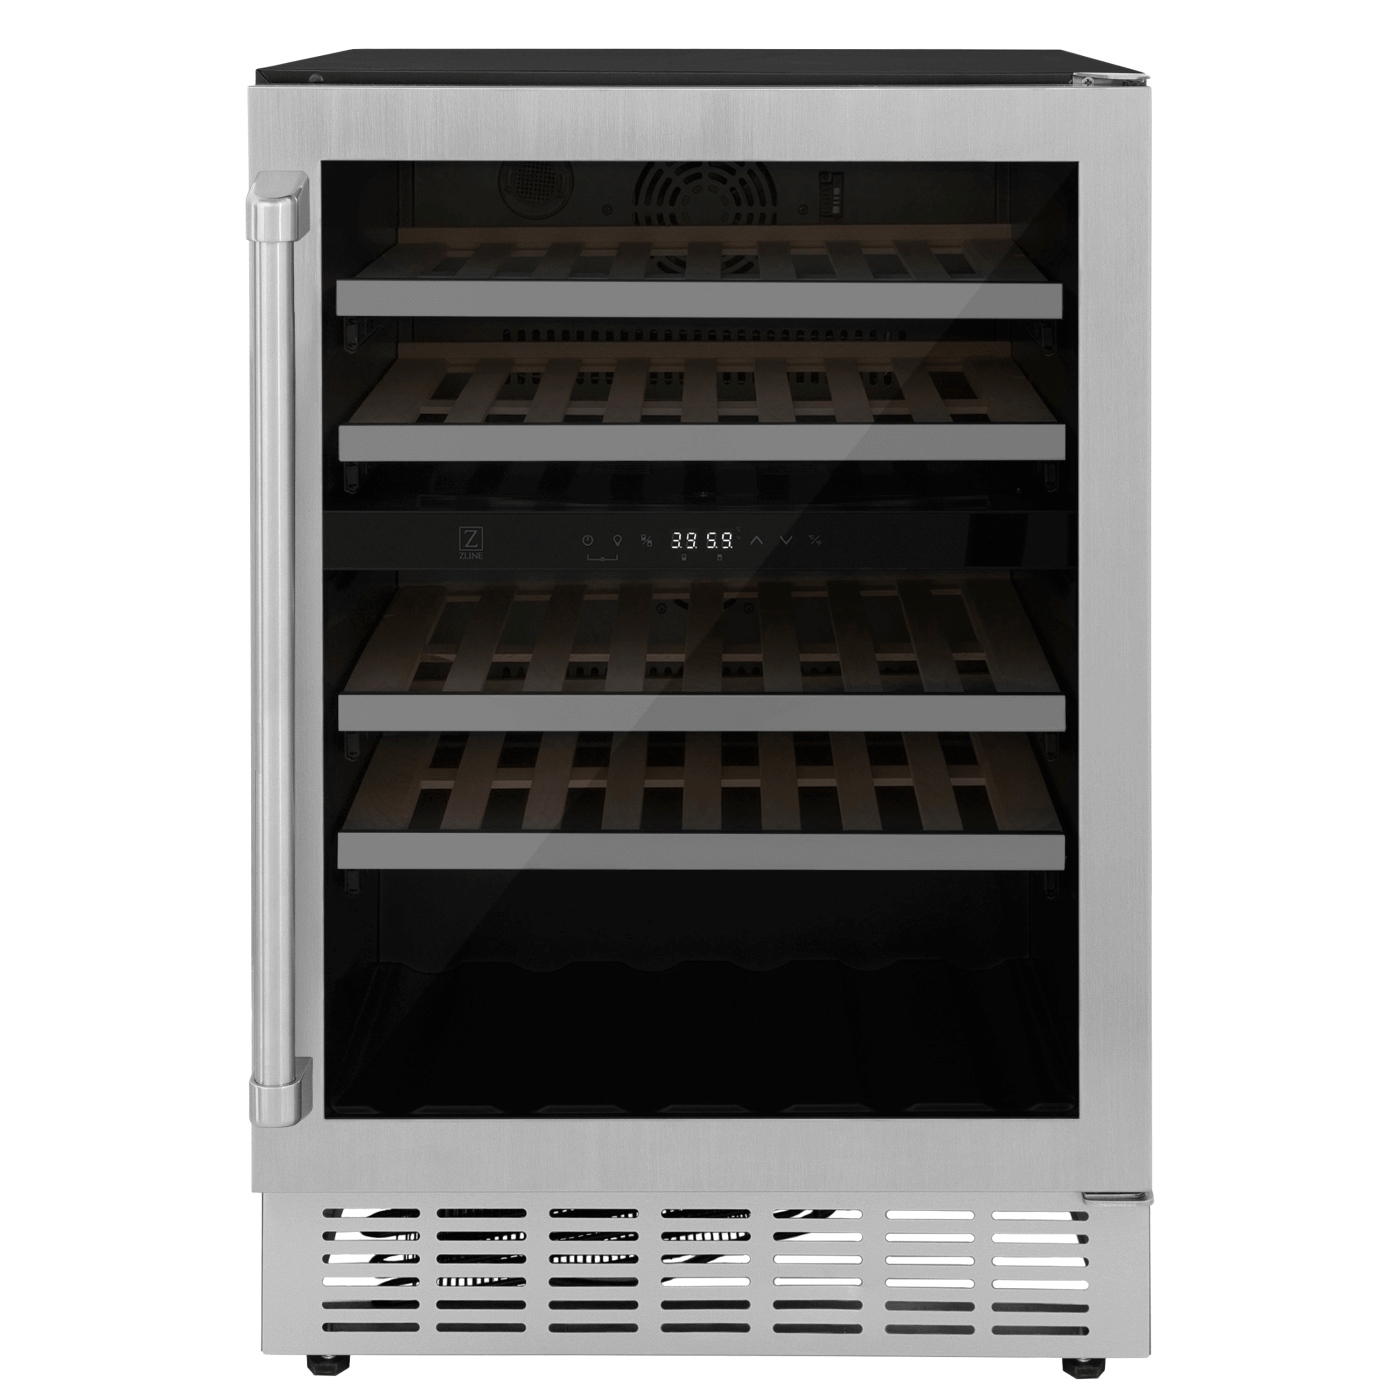 ZLINE 24 In. Monument Dual Zone 44-Bottle Wine Cooler in Stainless Steel with Wood Shelf (RWV-UD-24) - white background